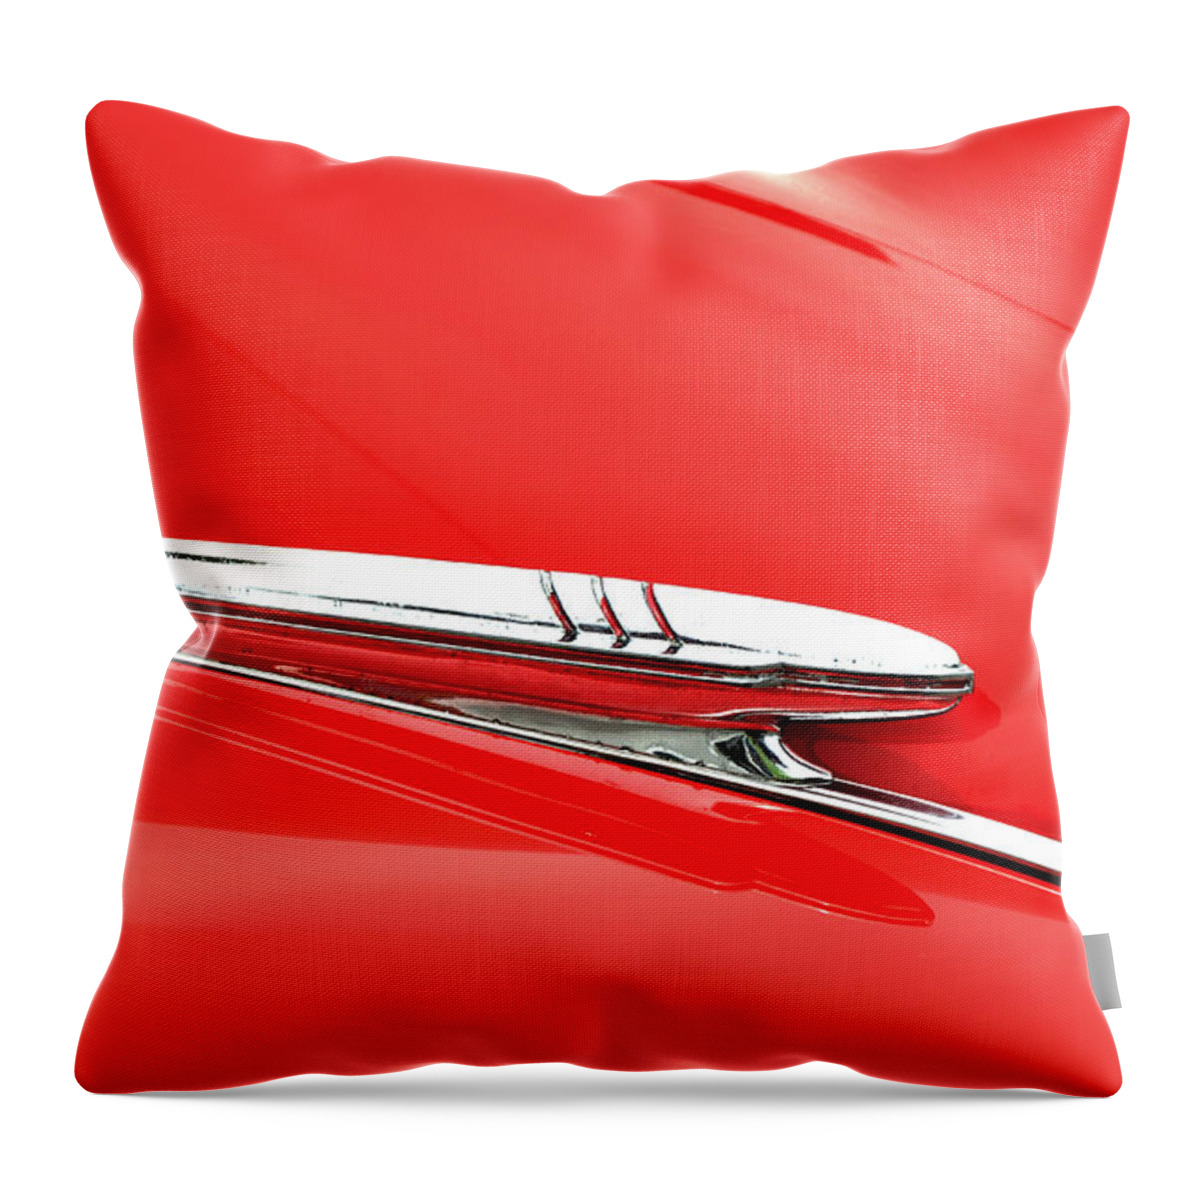 1938 Chevy Throw Pillow featuring the photograph 1938 Chevy Hood Ornament by Paul Mashburn